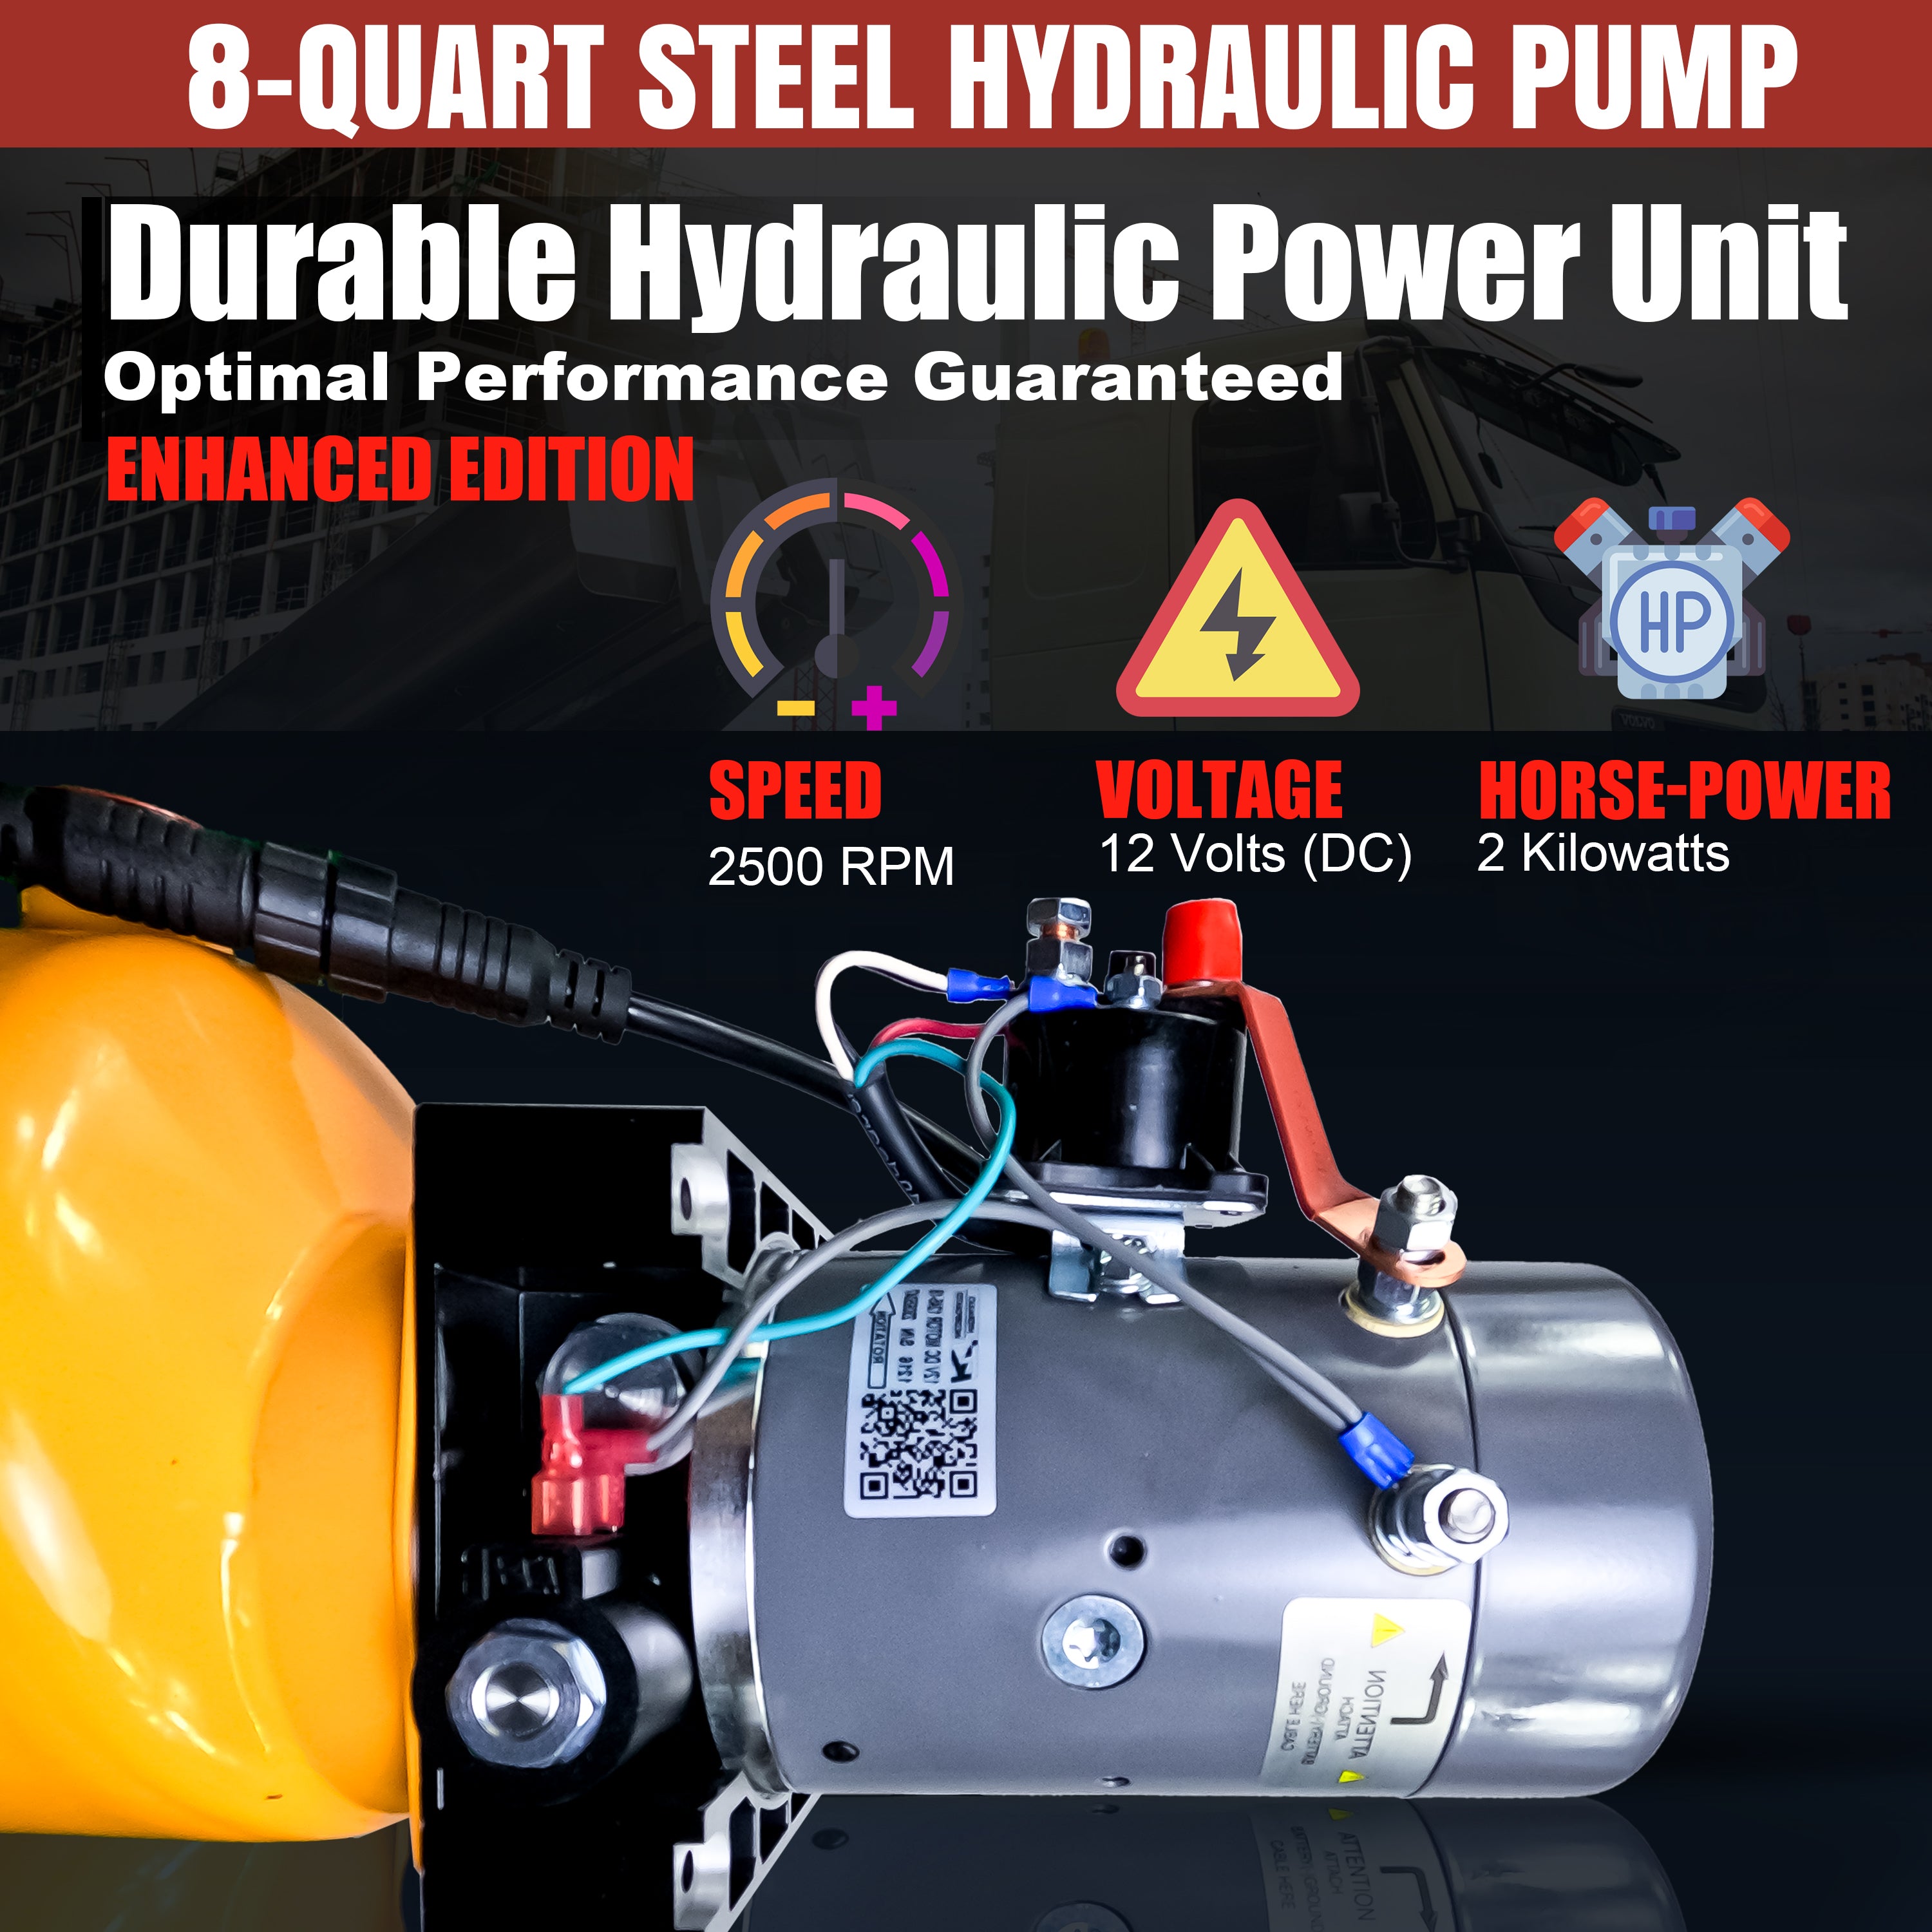 KTI 12V Single-Acting Hydraulic Pump with a steel reservoir, featuring a compact design, visible gauge, QR code, and yellow warning triangle for optimal dump bed system performance.